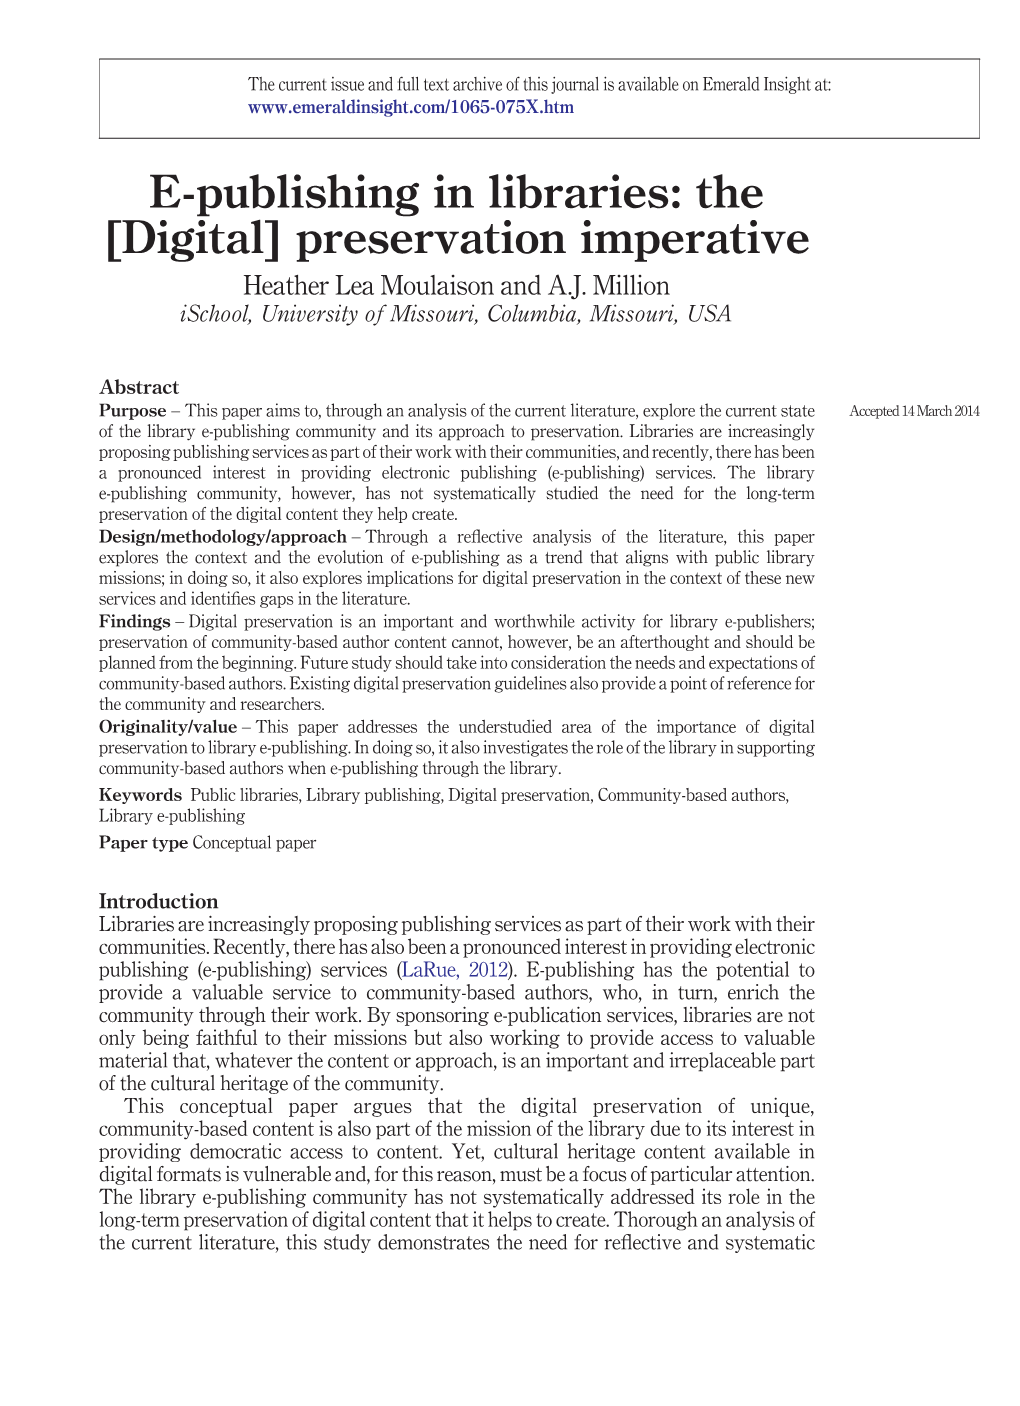 E-Publishing in Libraries: the [Digital] Preservation Imperative Heather Lea Moulaison and A.J